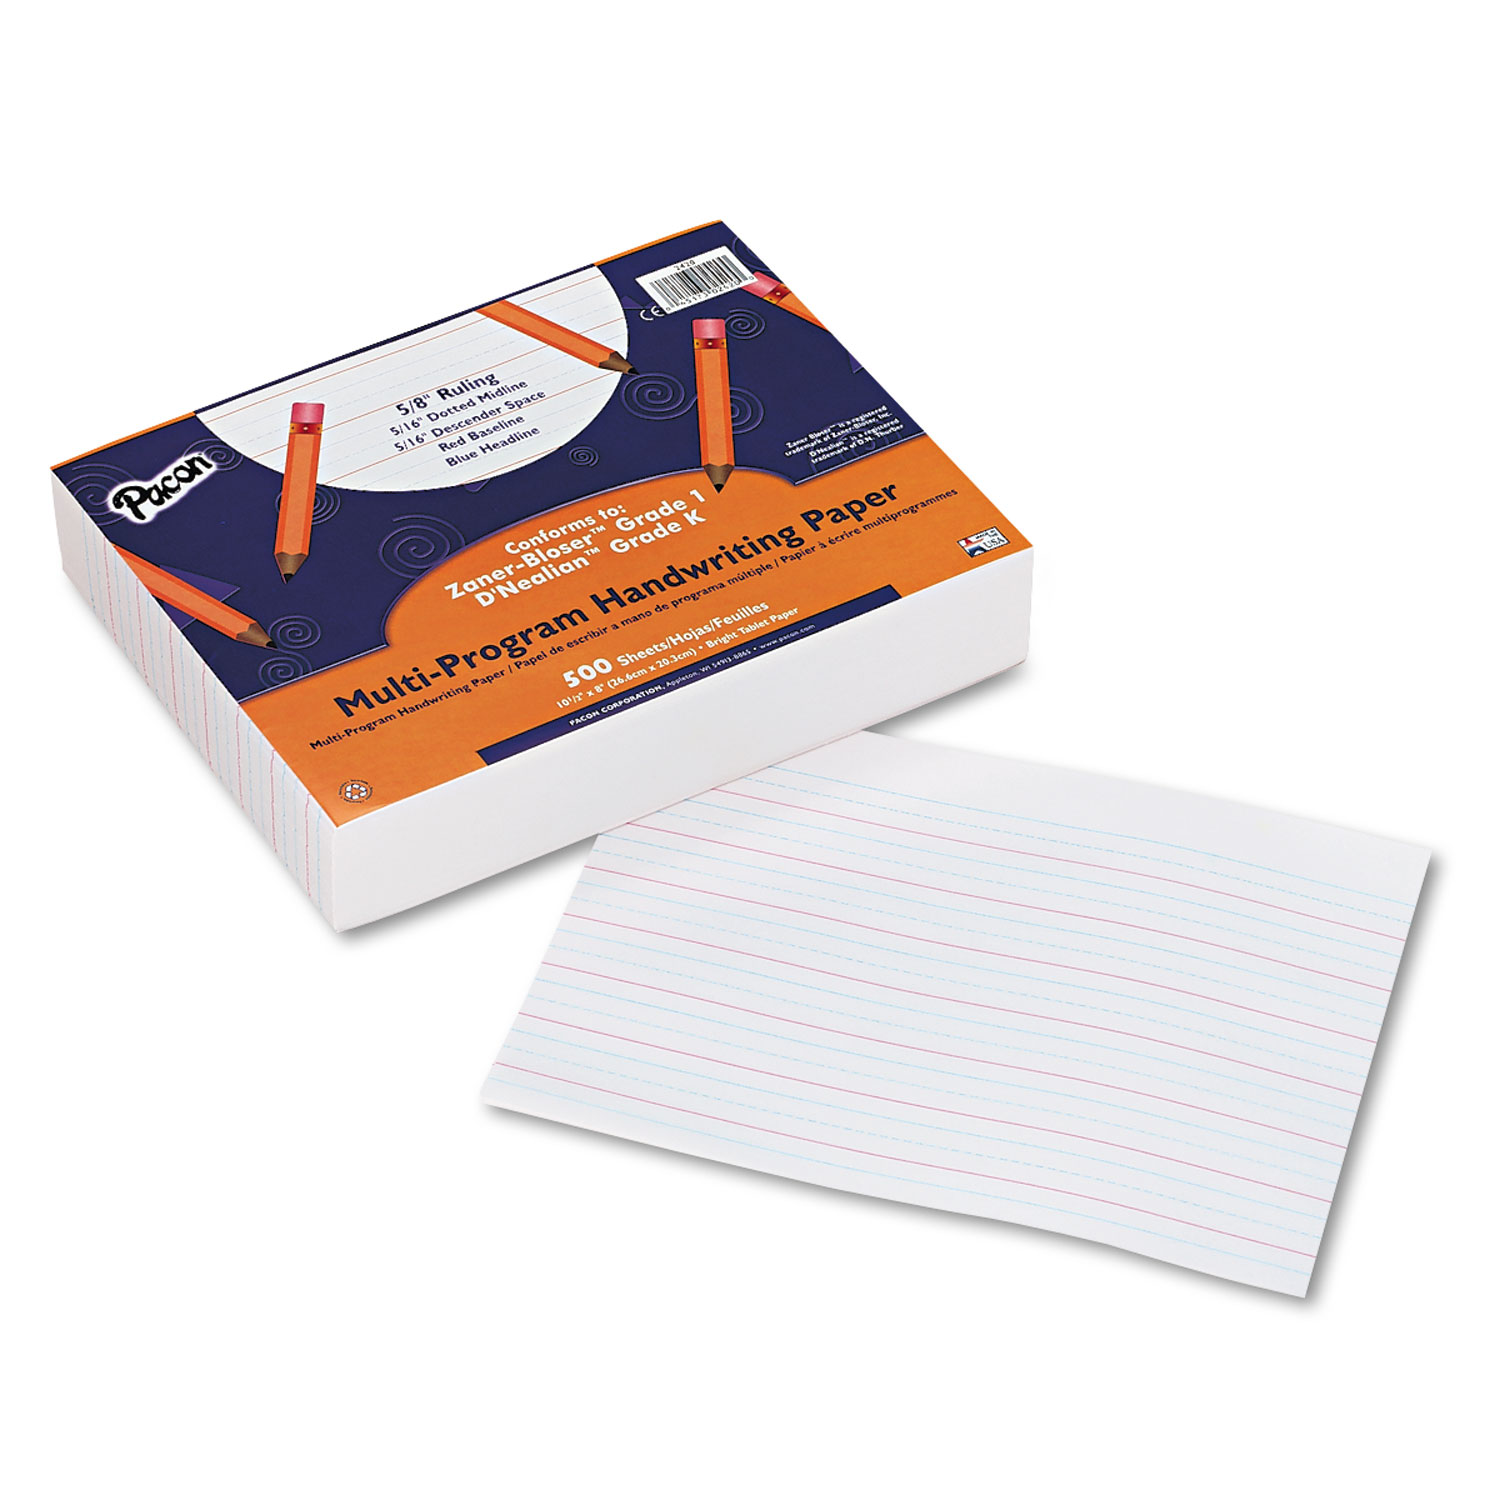  Pacon 2420 Multi-Program Handwriting Paper, 16 lb, 5/8 Long Rule, One-Sided, 8 x 10.5, 500/Pack (PAC2420) 